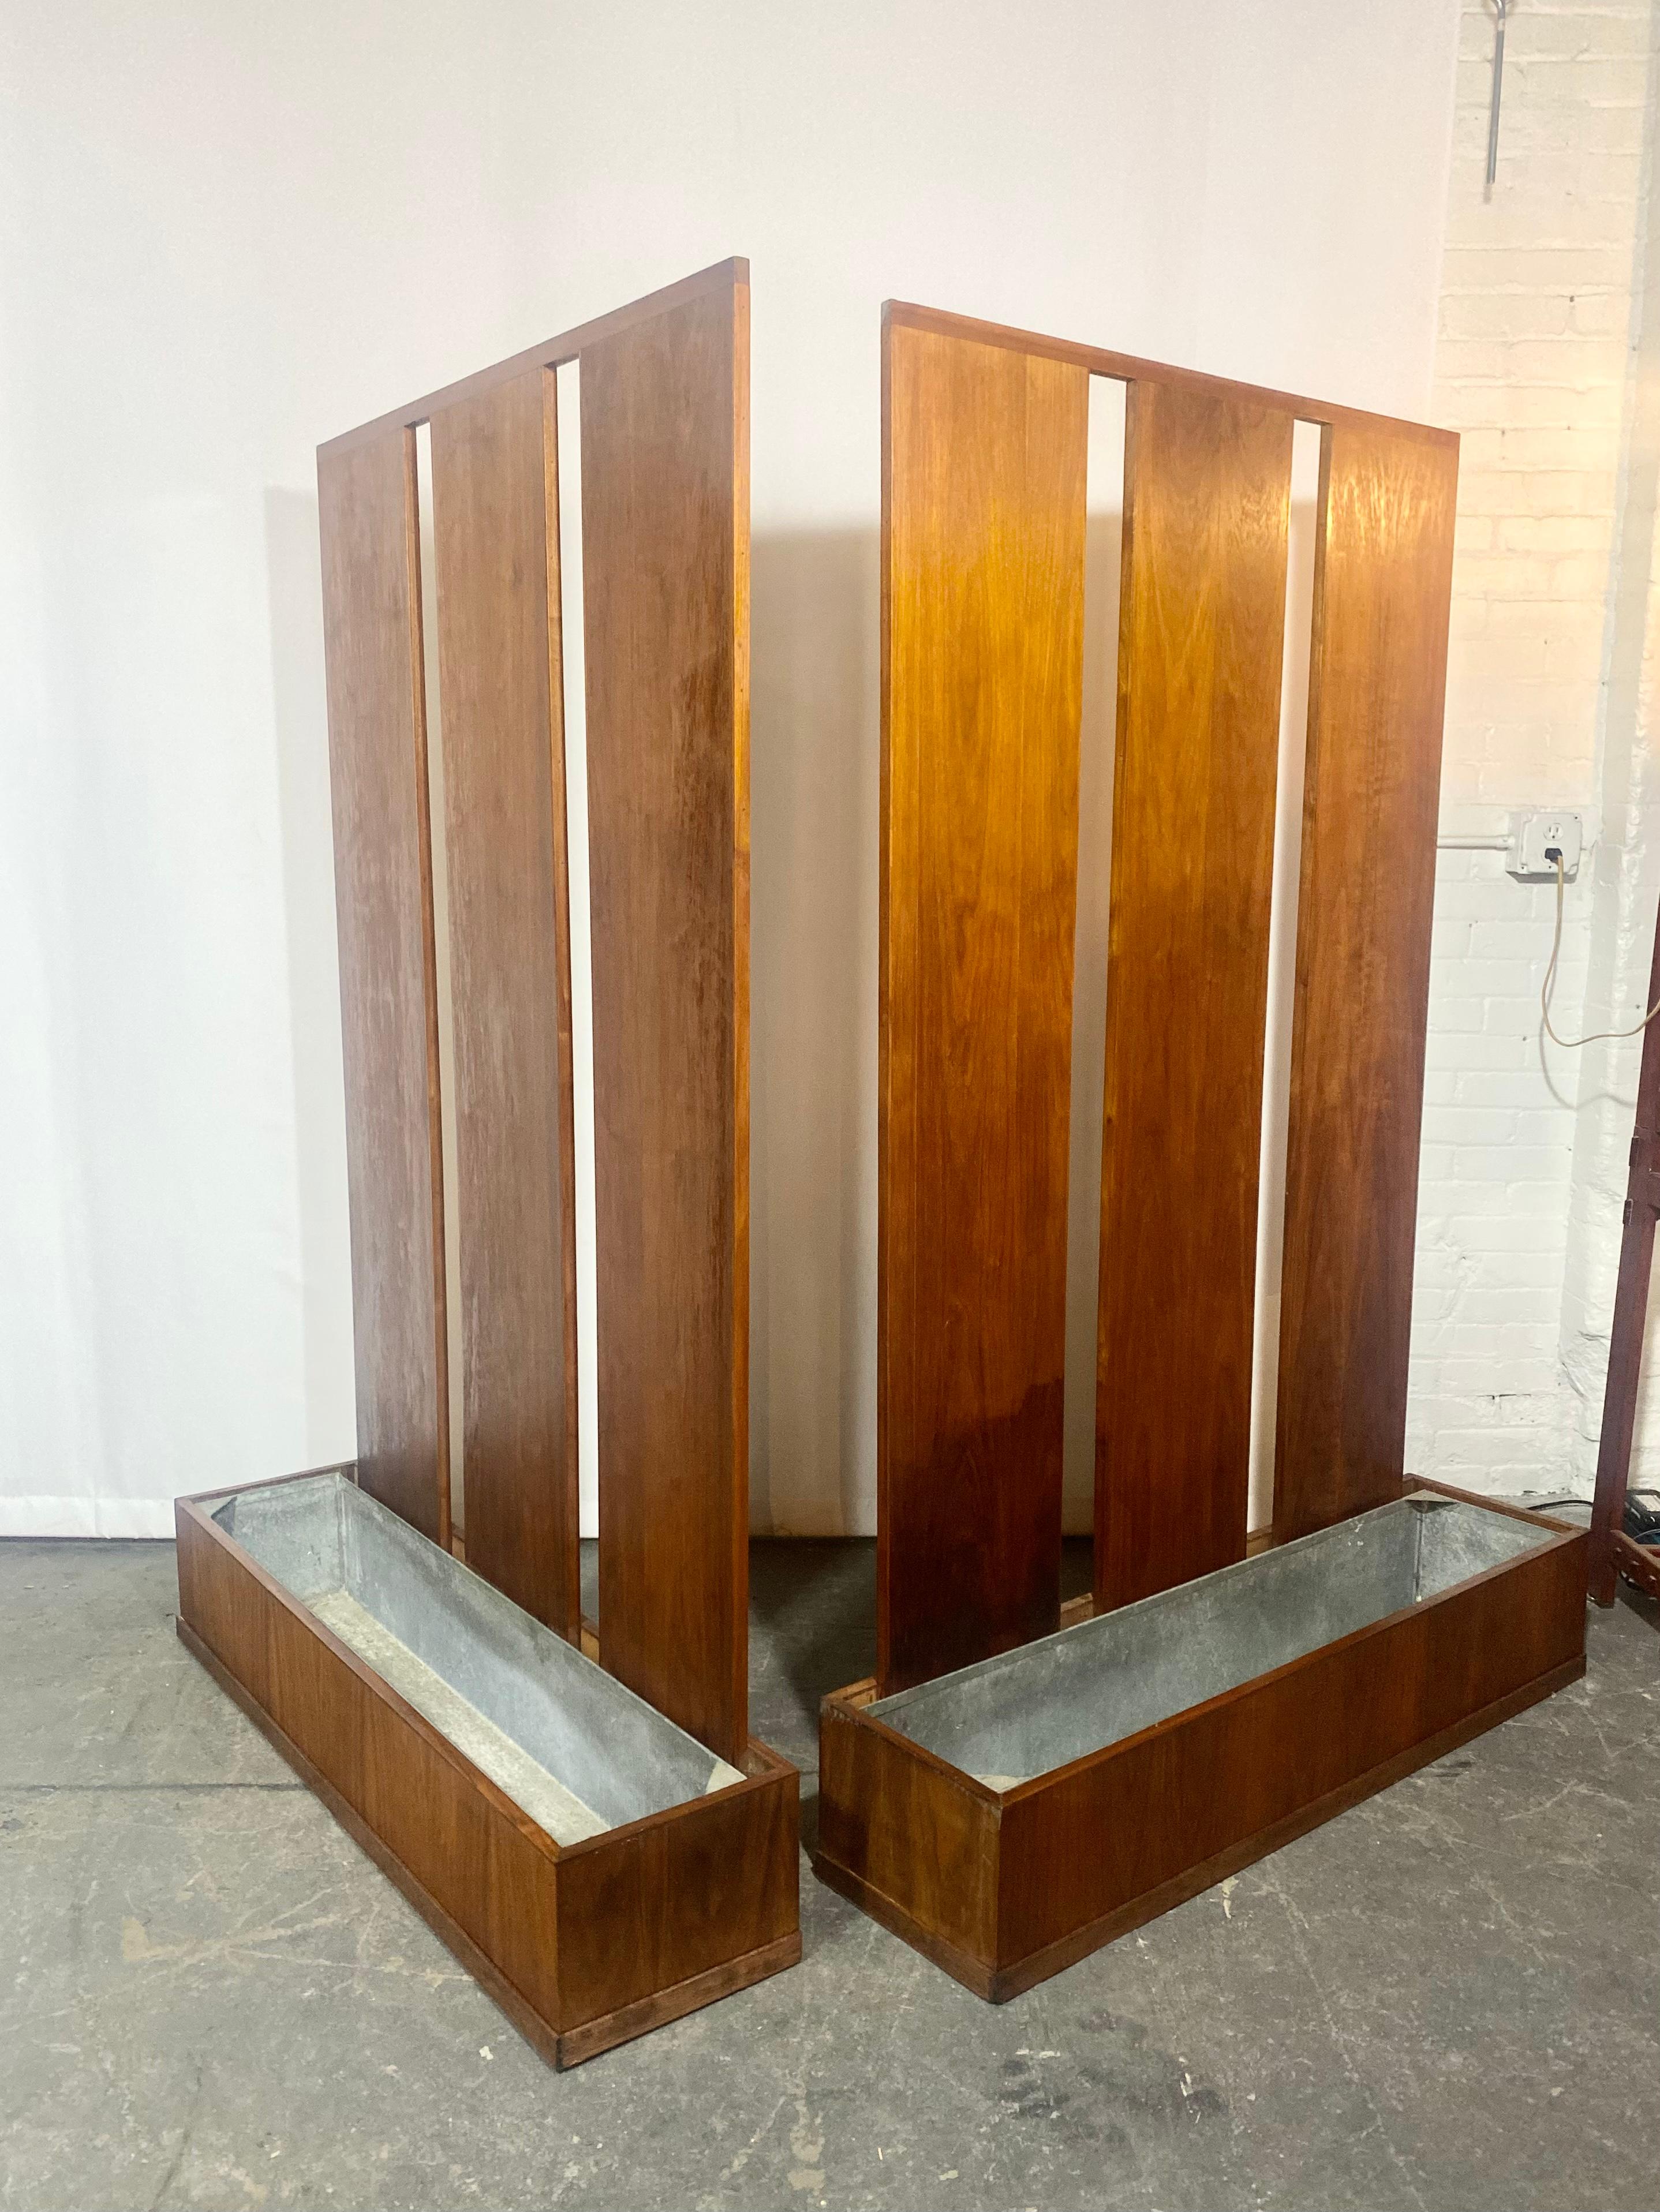 Galvanized Classic Mid Century Modern Architectural Room Divider's with planter boxes For Sale